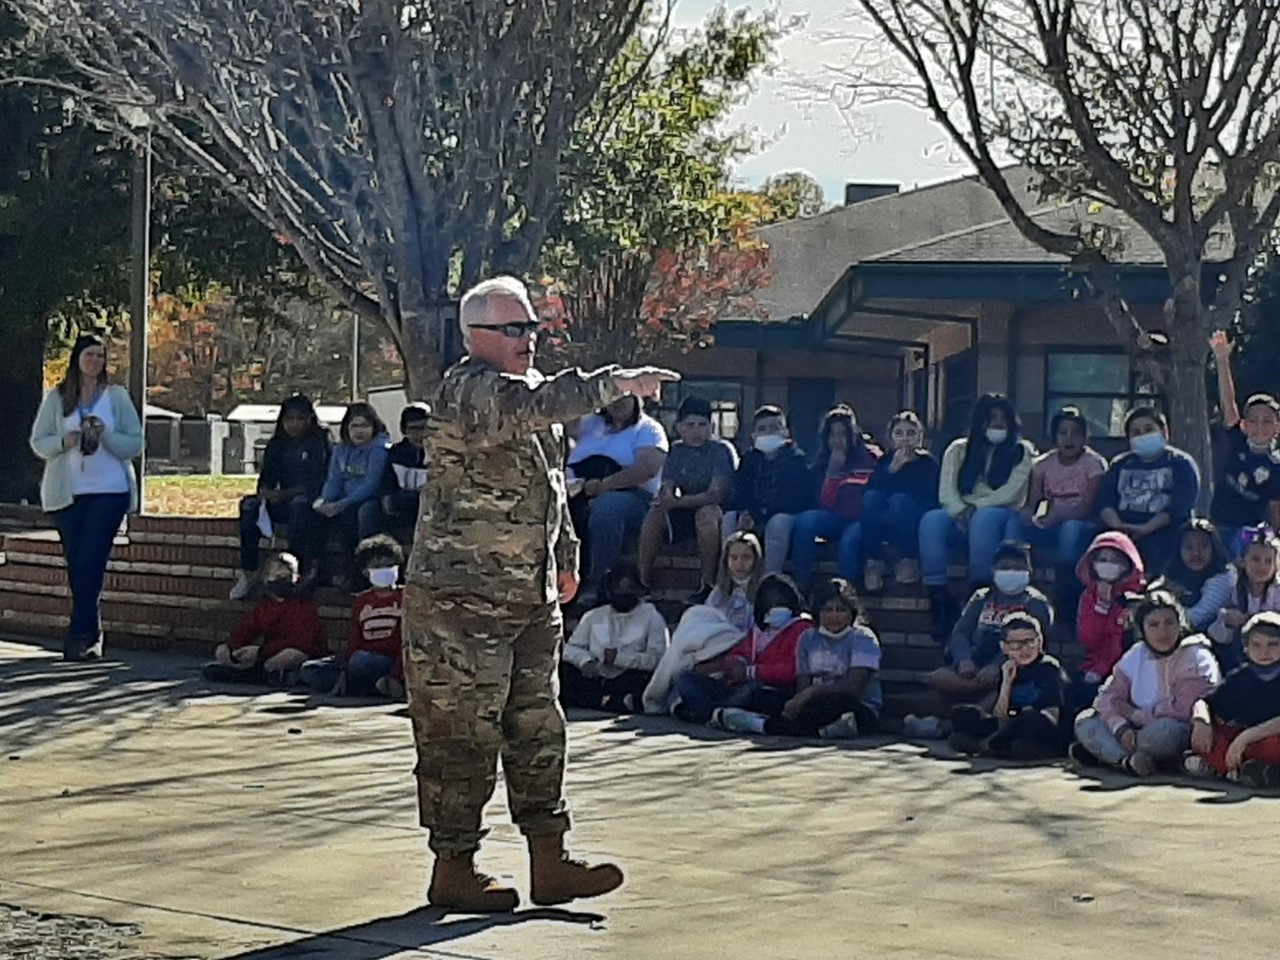 Major Howie Speaking to the Fourth Graders.